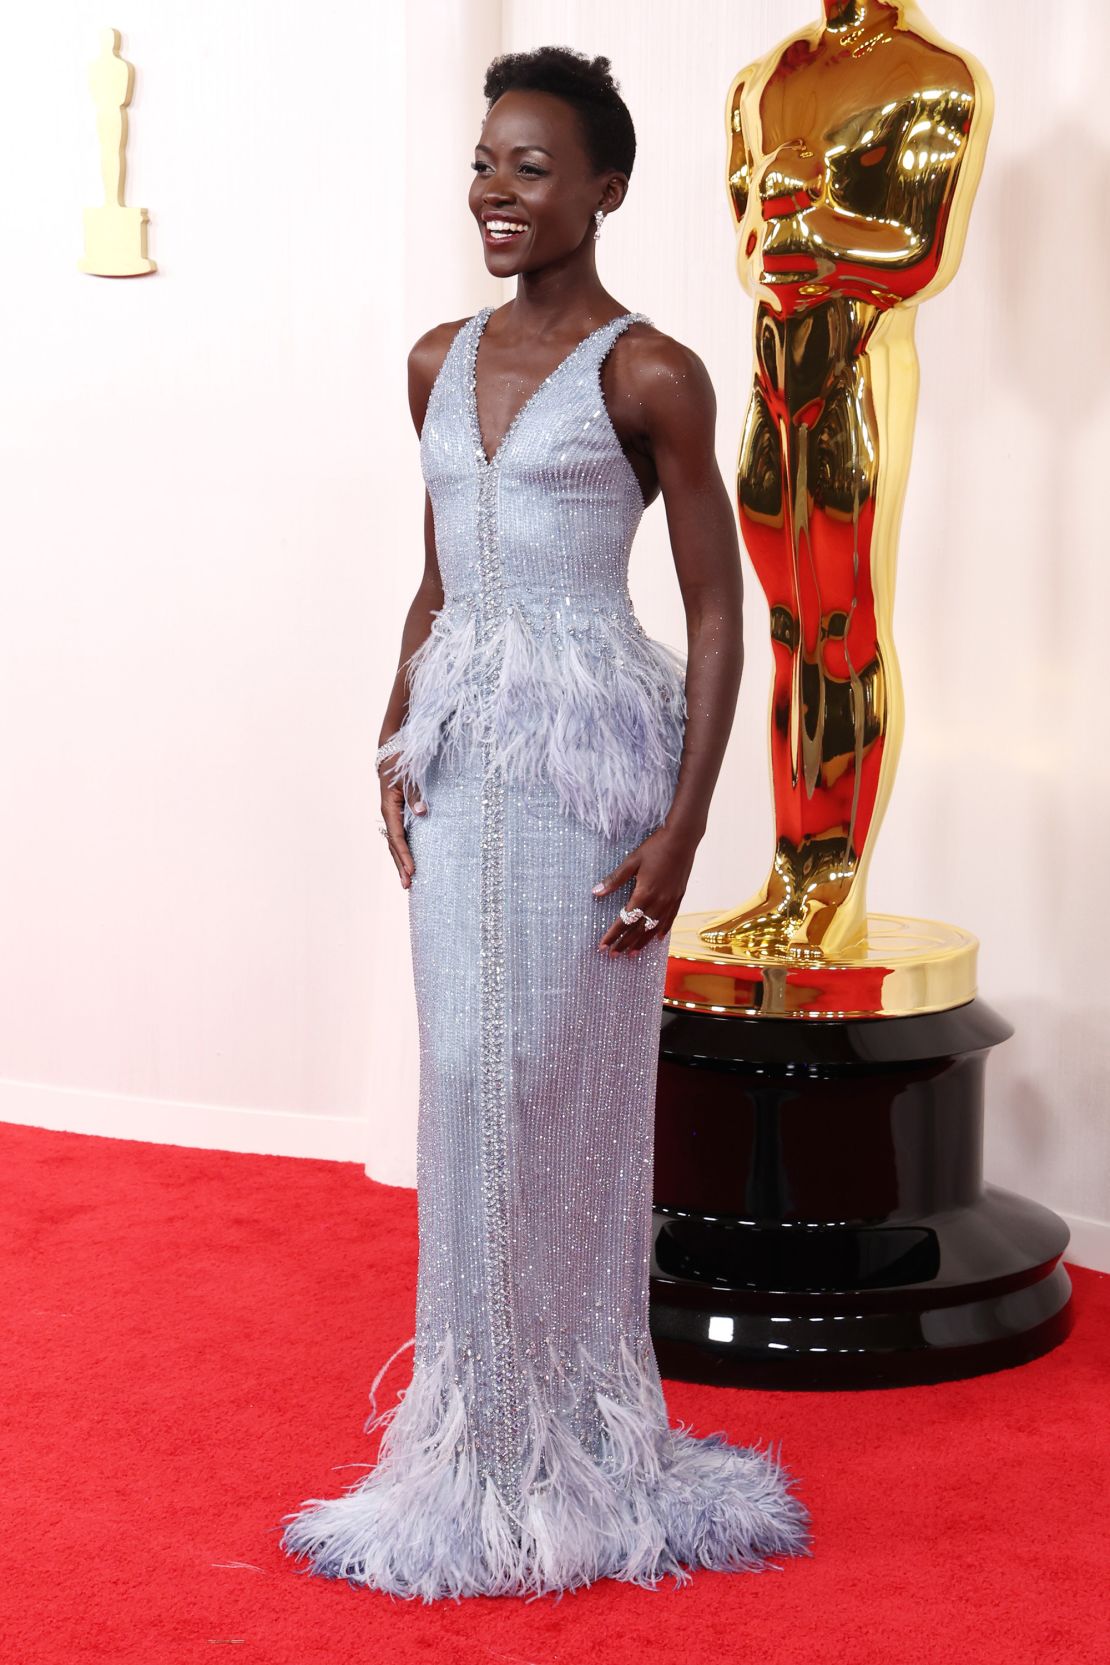 Lupita Nyong'o took to the red carpet in a dazzling Armani Privé dress featuring feather-like embellishments at the waist and hem.  The actor accessorized with white gold De Beers jewellery.